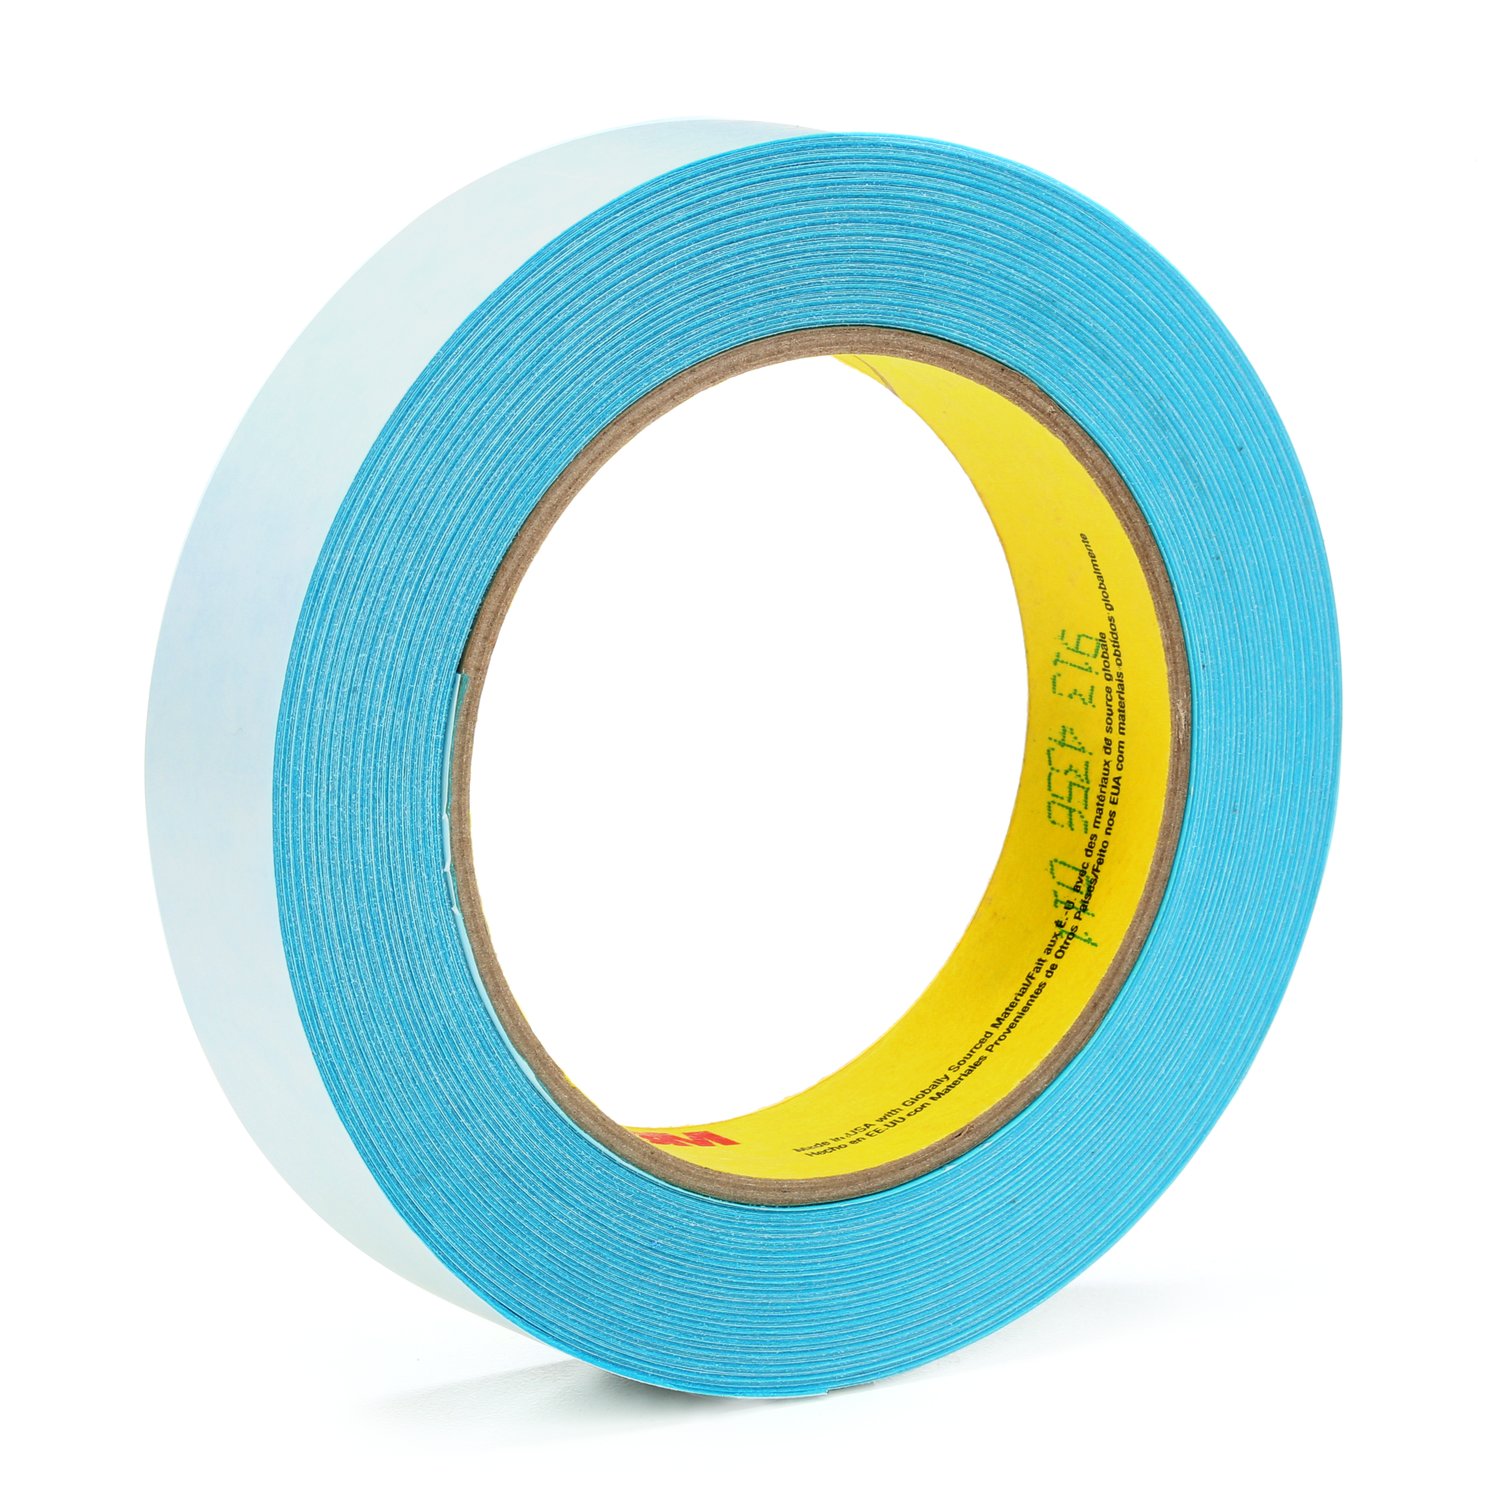 7100027393 - 3M Repulpable Double Coated Flying Splice Tape 913, Blue, 24 mm x 33 m,
3 mil, 36 Roll/Case